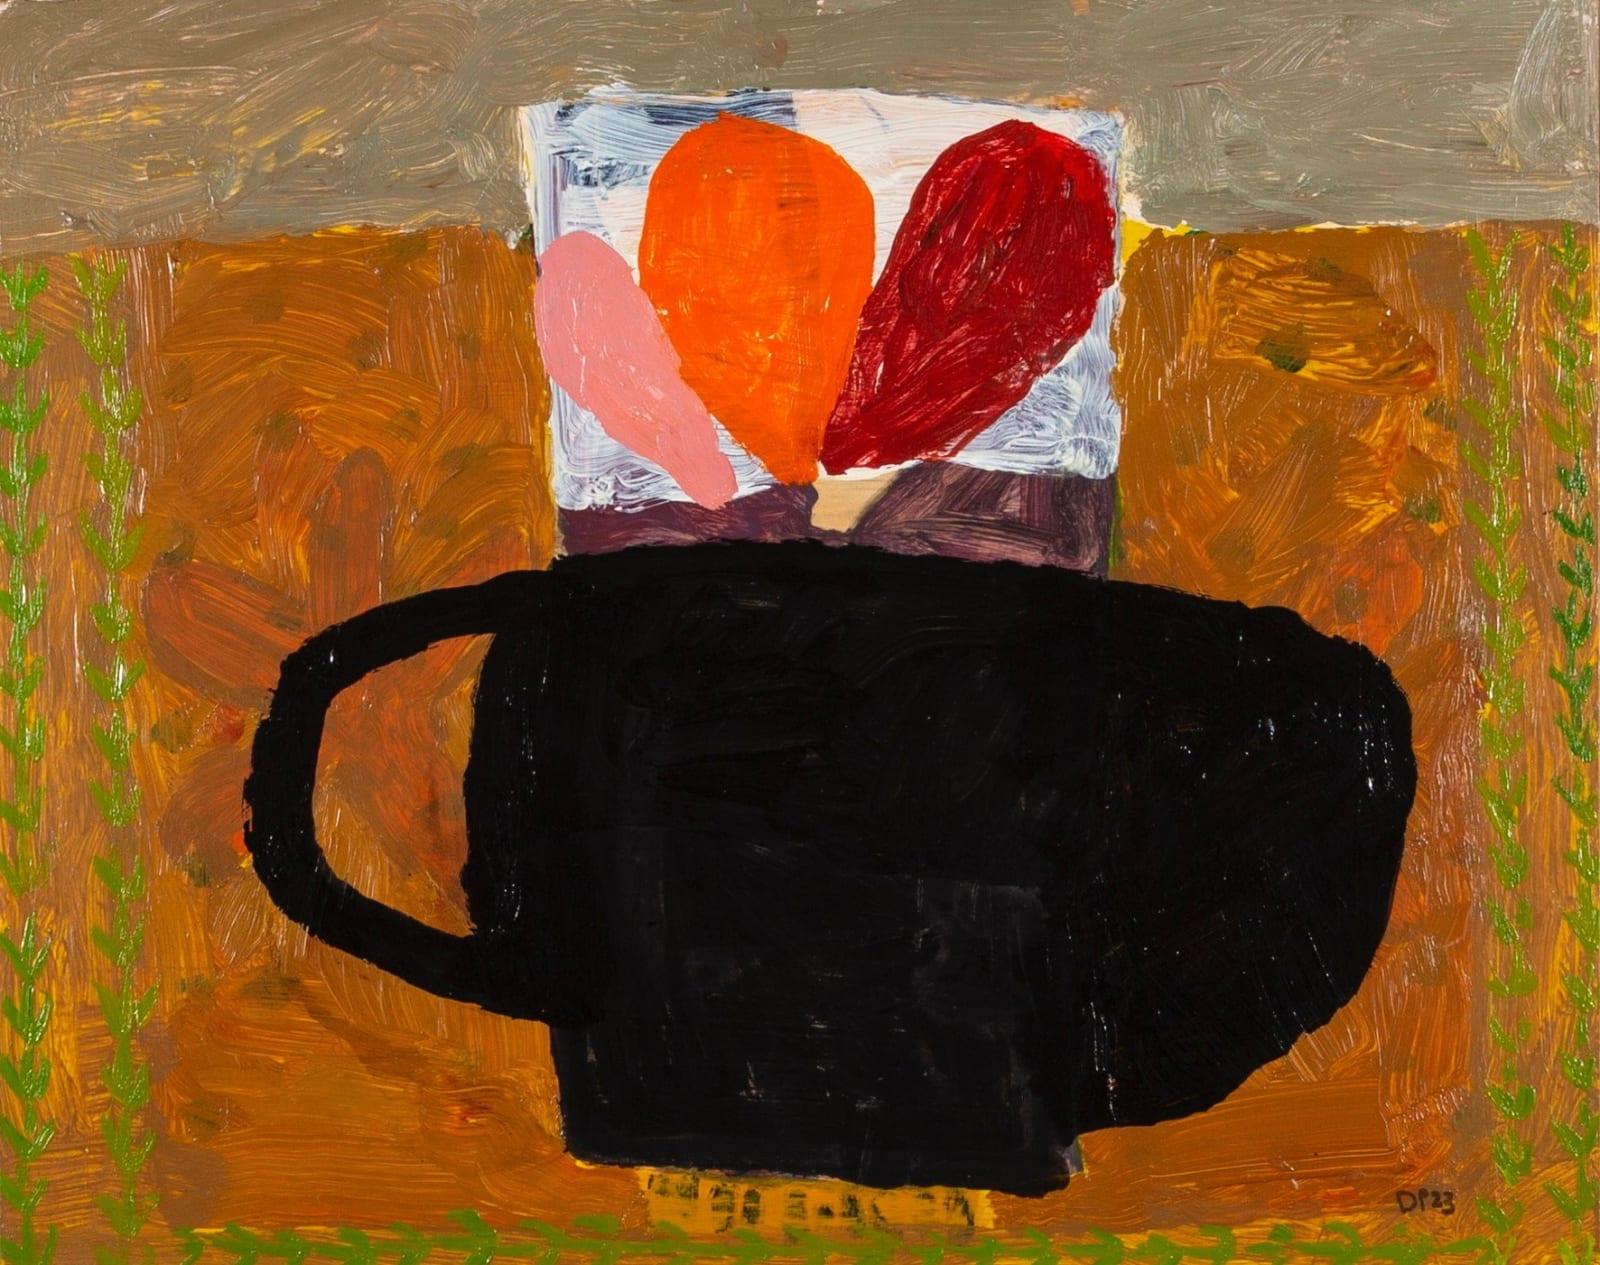 Black Bean Pot Painting by David Pearce B. 1963, 2023

Additional information:
Medium: Acrylic on panel
Dimensions: 40 x 50 cm
15 3/4 x 19 3/4 in
Signed with initials and dated.

David Pearce is a British painter.

After travelling widely throughout